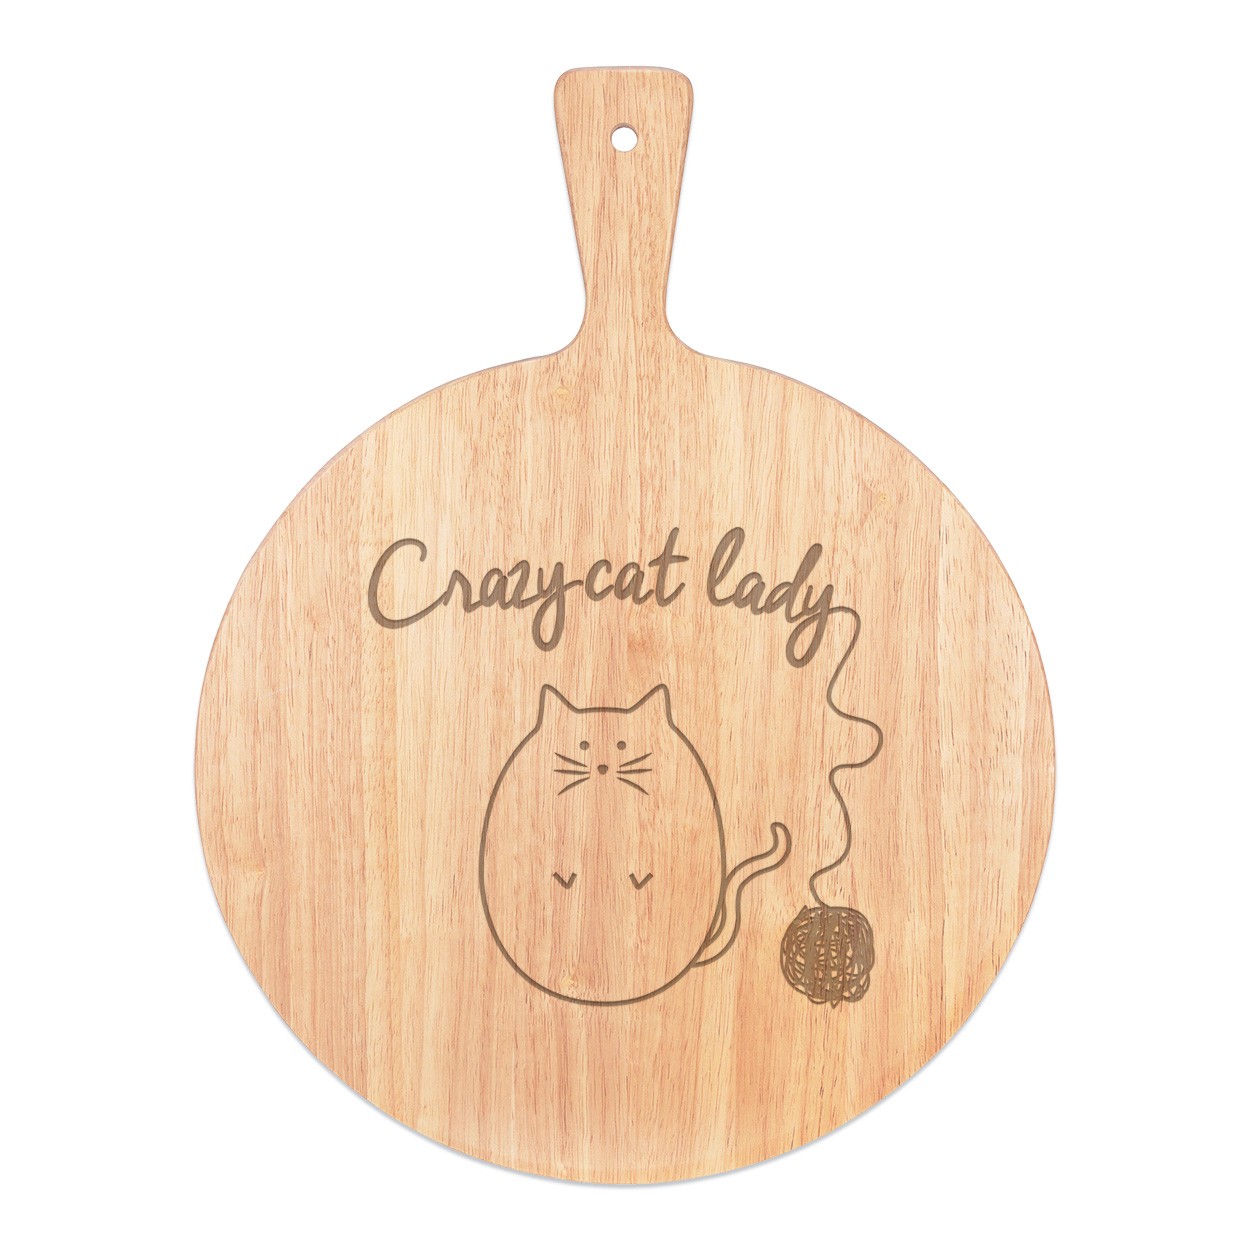 Ball Of Yarn Crazy Cat Lady Pizza Board Paddle Serving Tray Handle Round Wooden 45x34cm